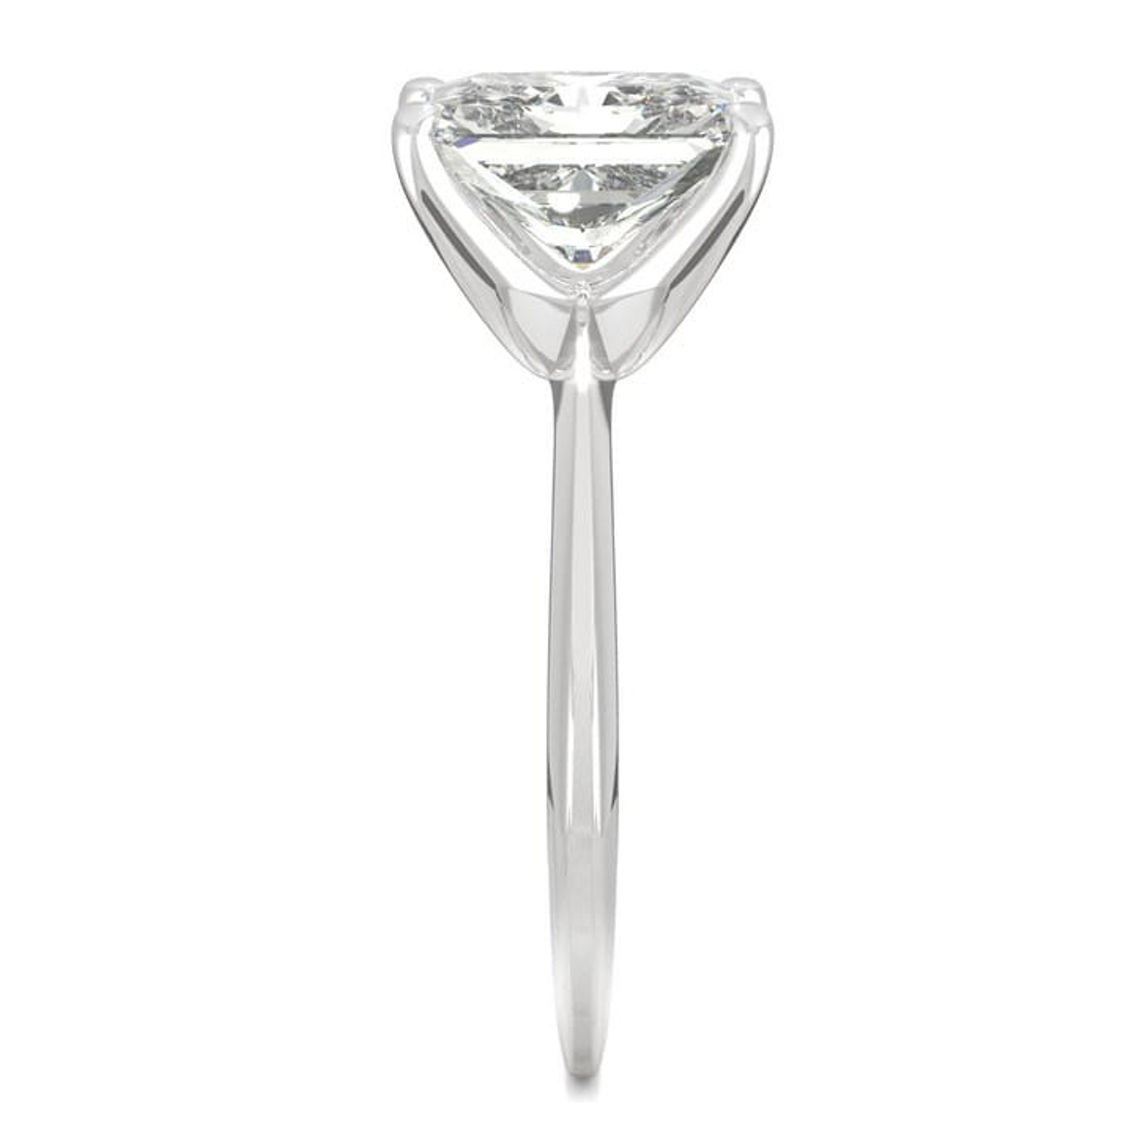 Charles & Colvard 2.70cttw Moissanite Radiant Cut Solitaire Ring in 14k White Gold - Image 3 of 5